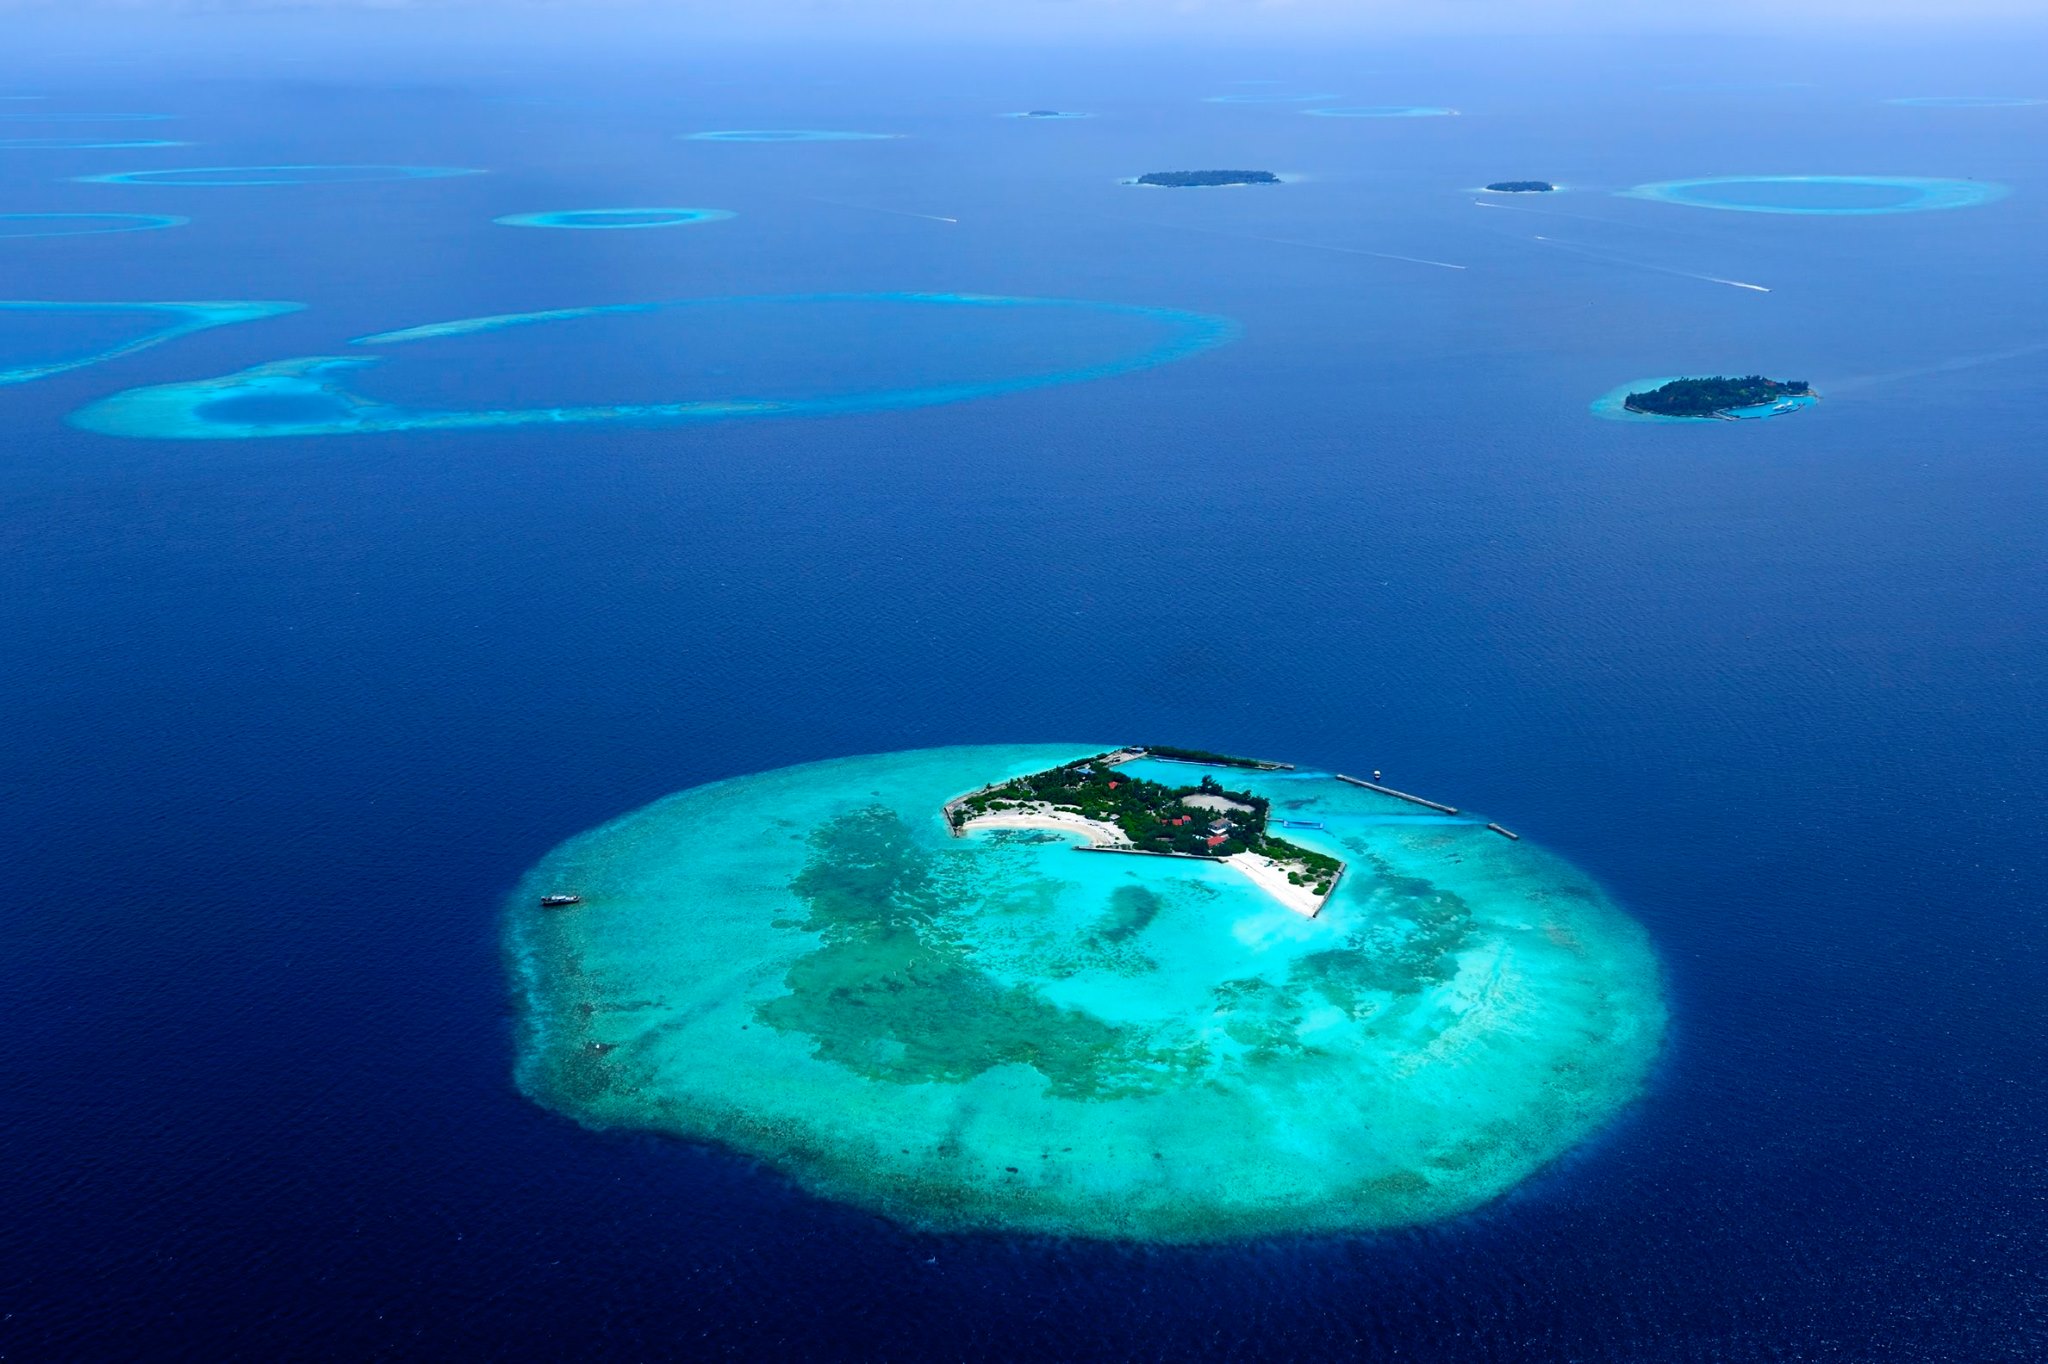 General 2048x1364 nature water island aerial view Maldives